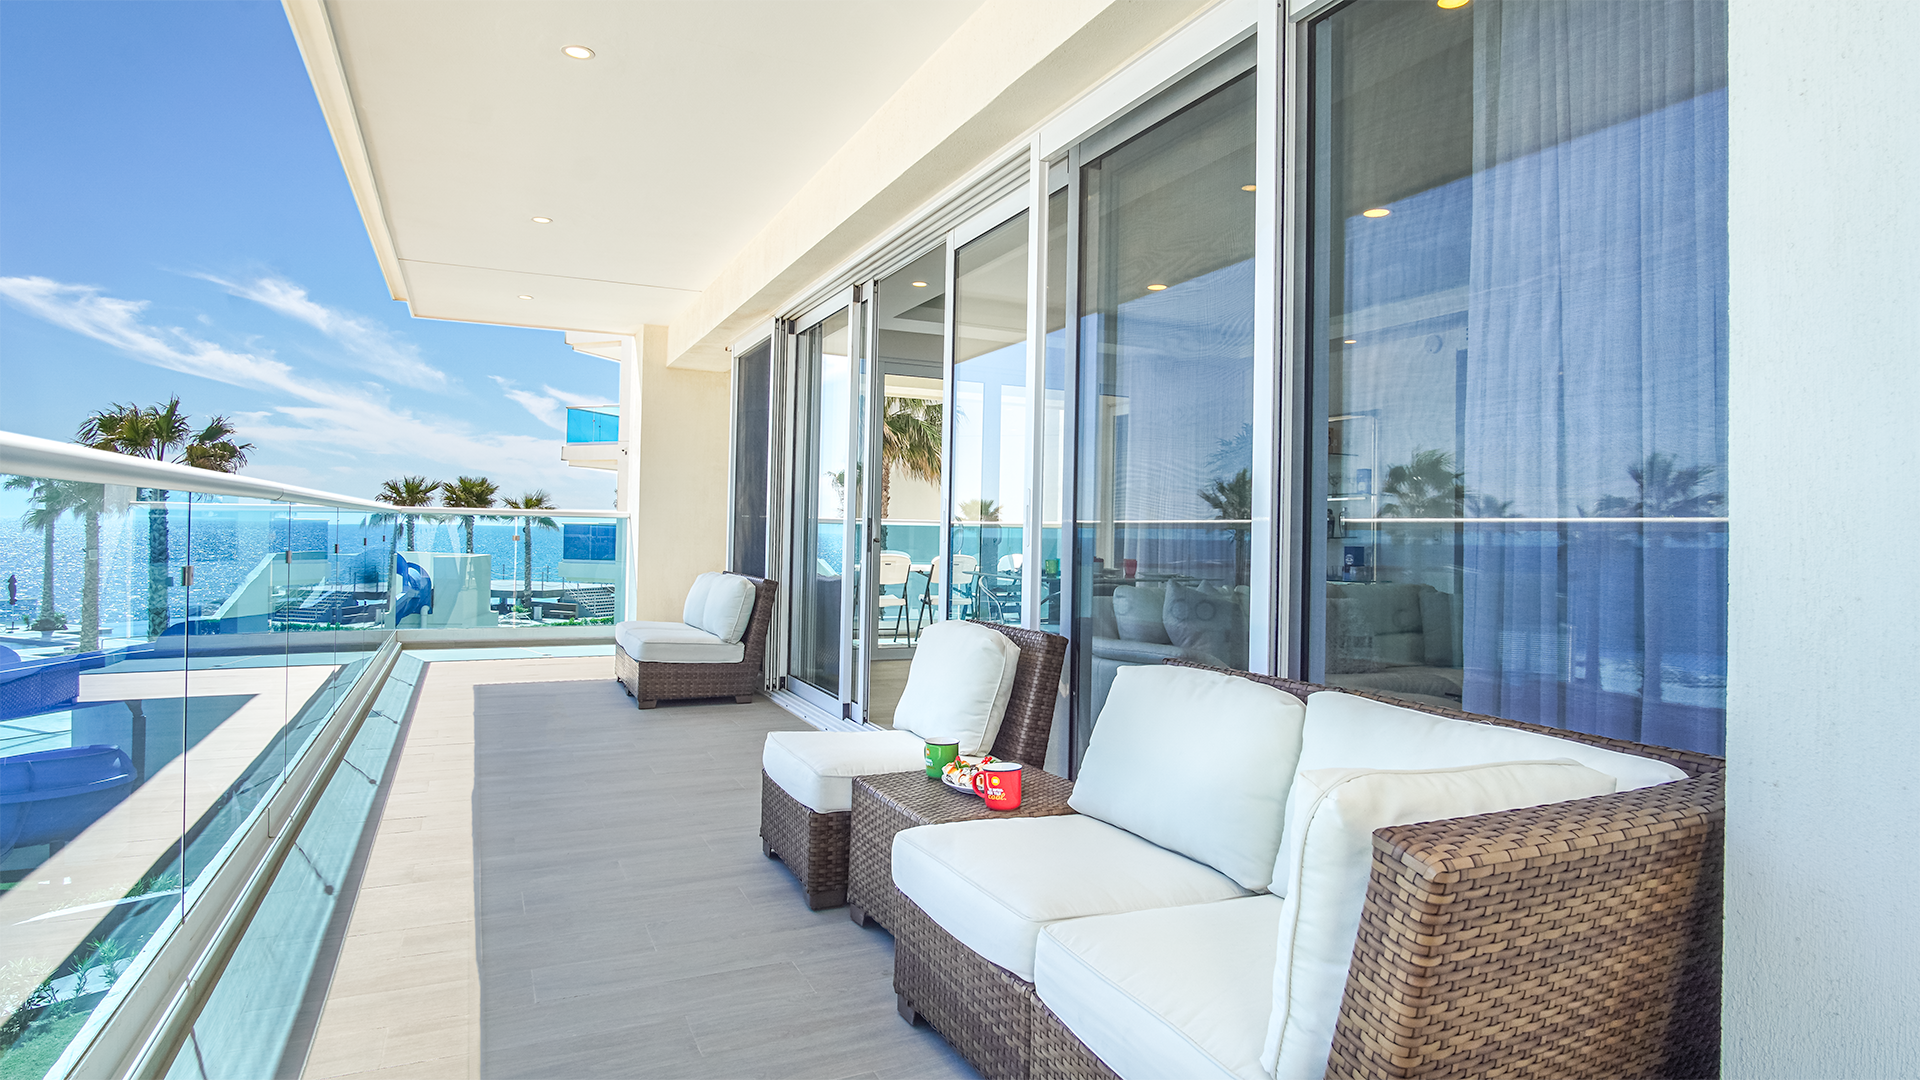 Expansive with great views, the terrace brings the Resort up closer.